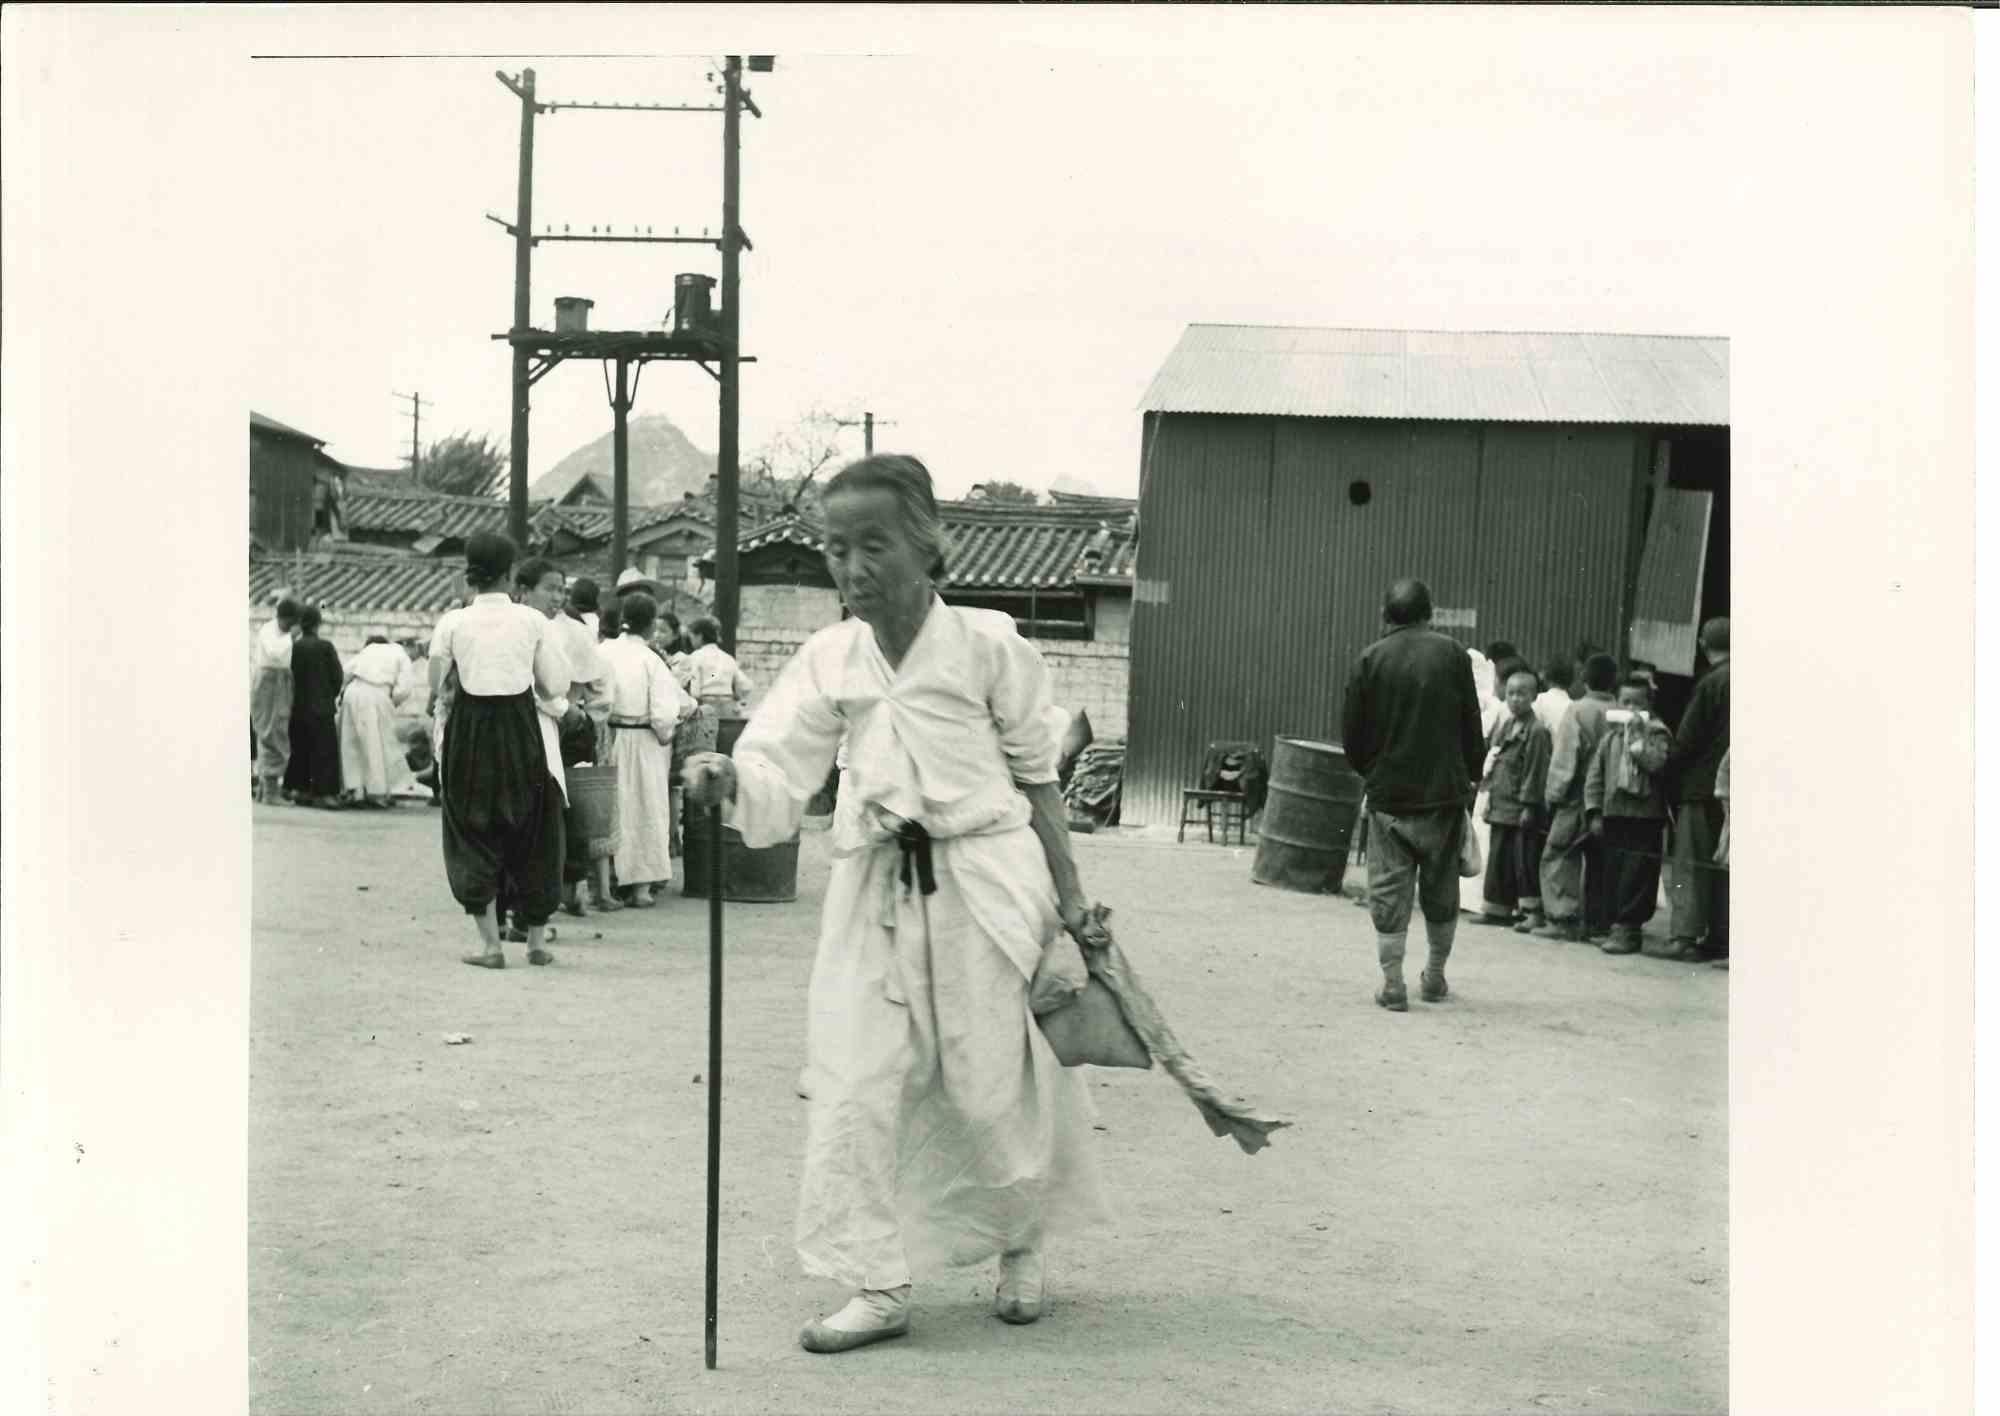 Unknown Figurative Photograph - Korean Woman after WWII - American Vintage Photograph - Mid 20th Century